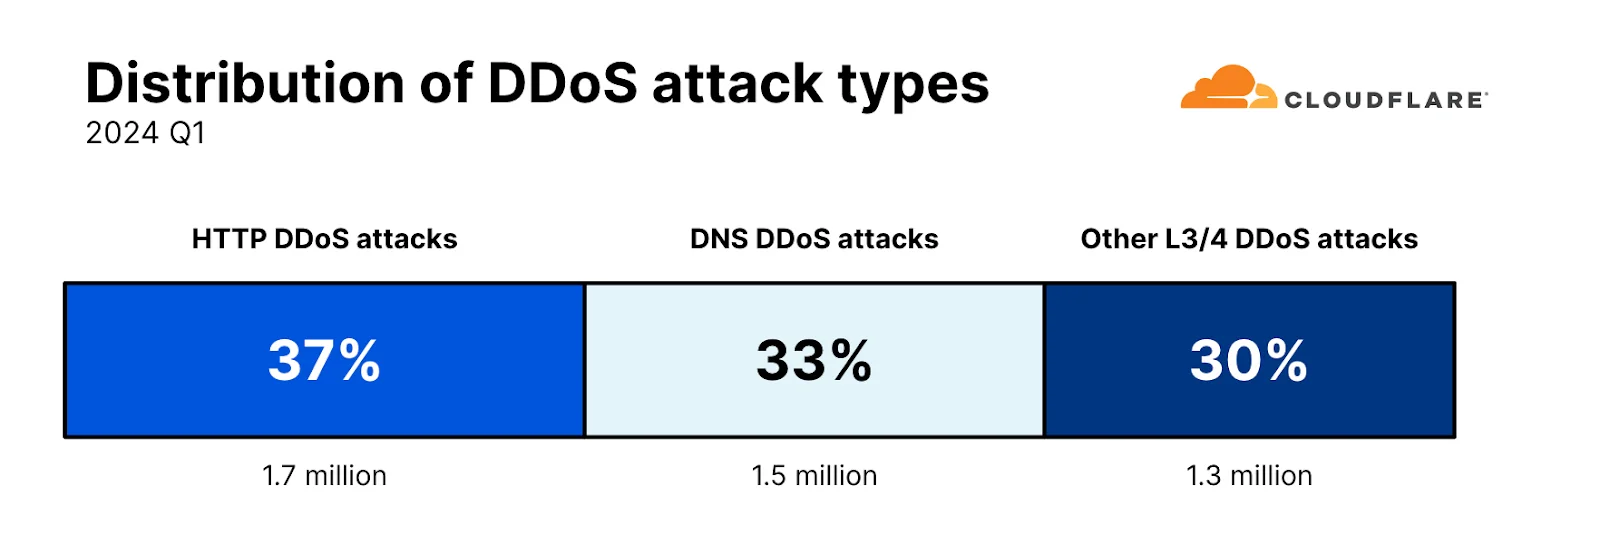 DDoS attack types according to Cloudflare report